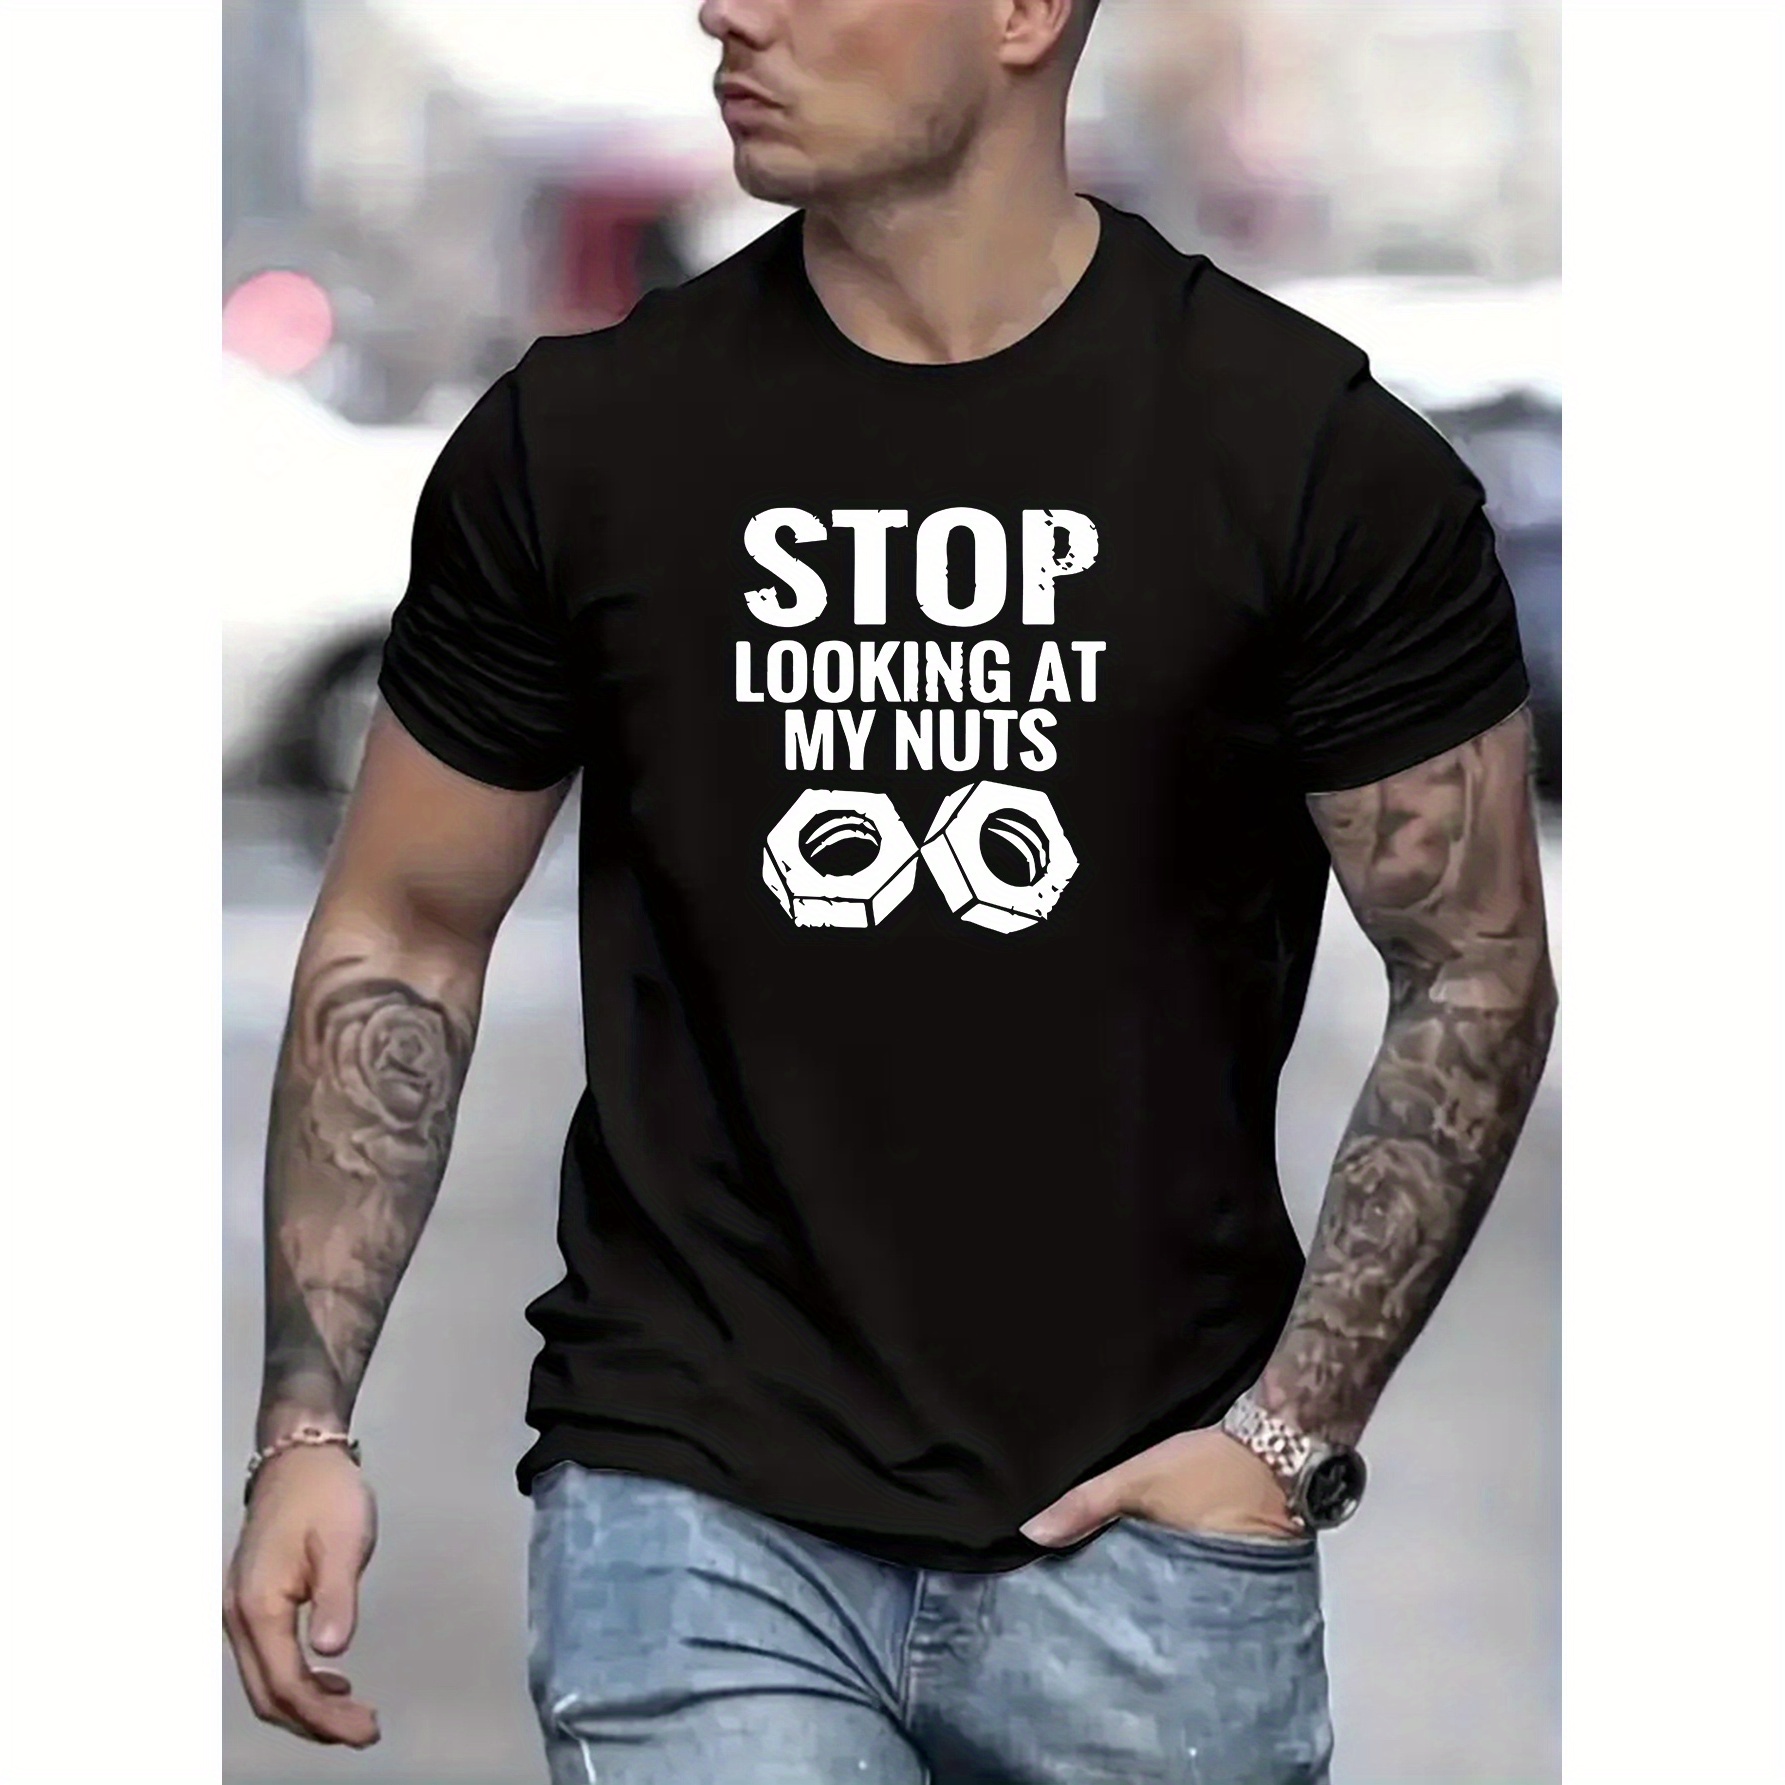 

Stop Looking At My Nuts Funny Letter Print Men's Short Sleeve Crew Neck T-shirts, Comfy Breathable Casual Elastic Tops, Men's Clothing